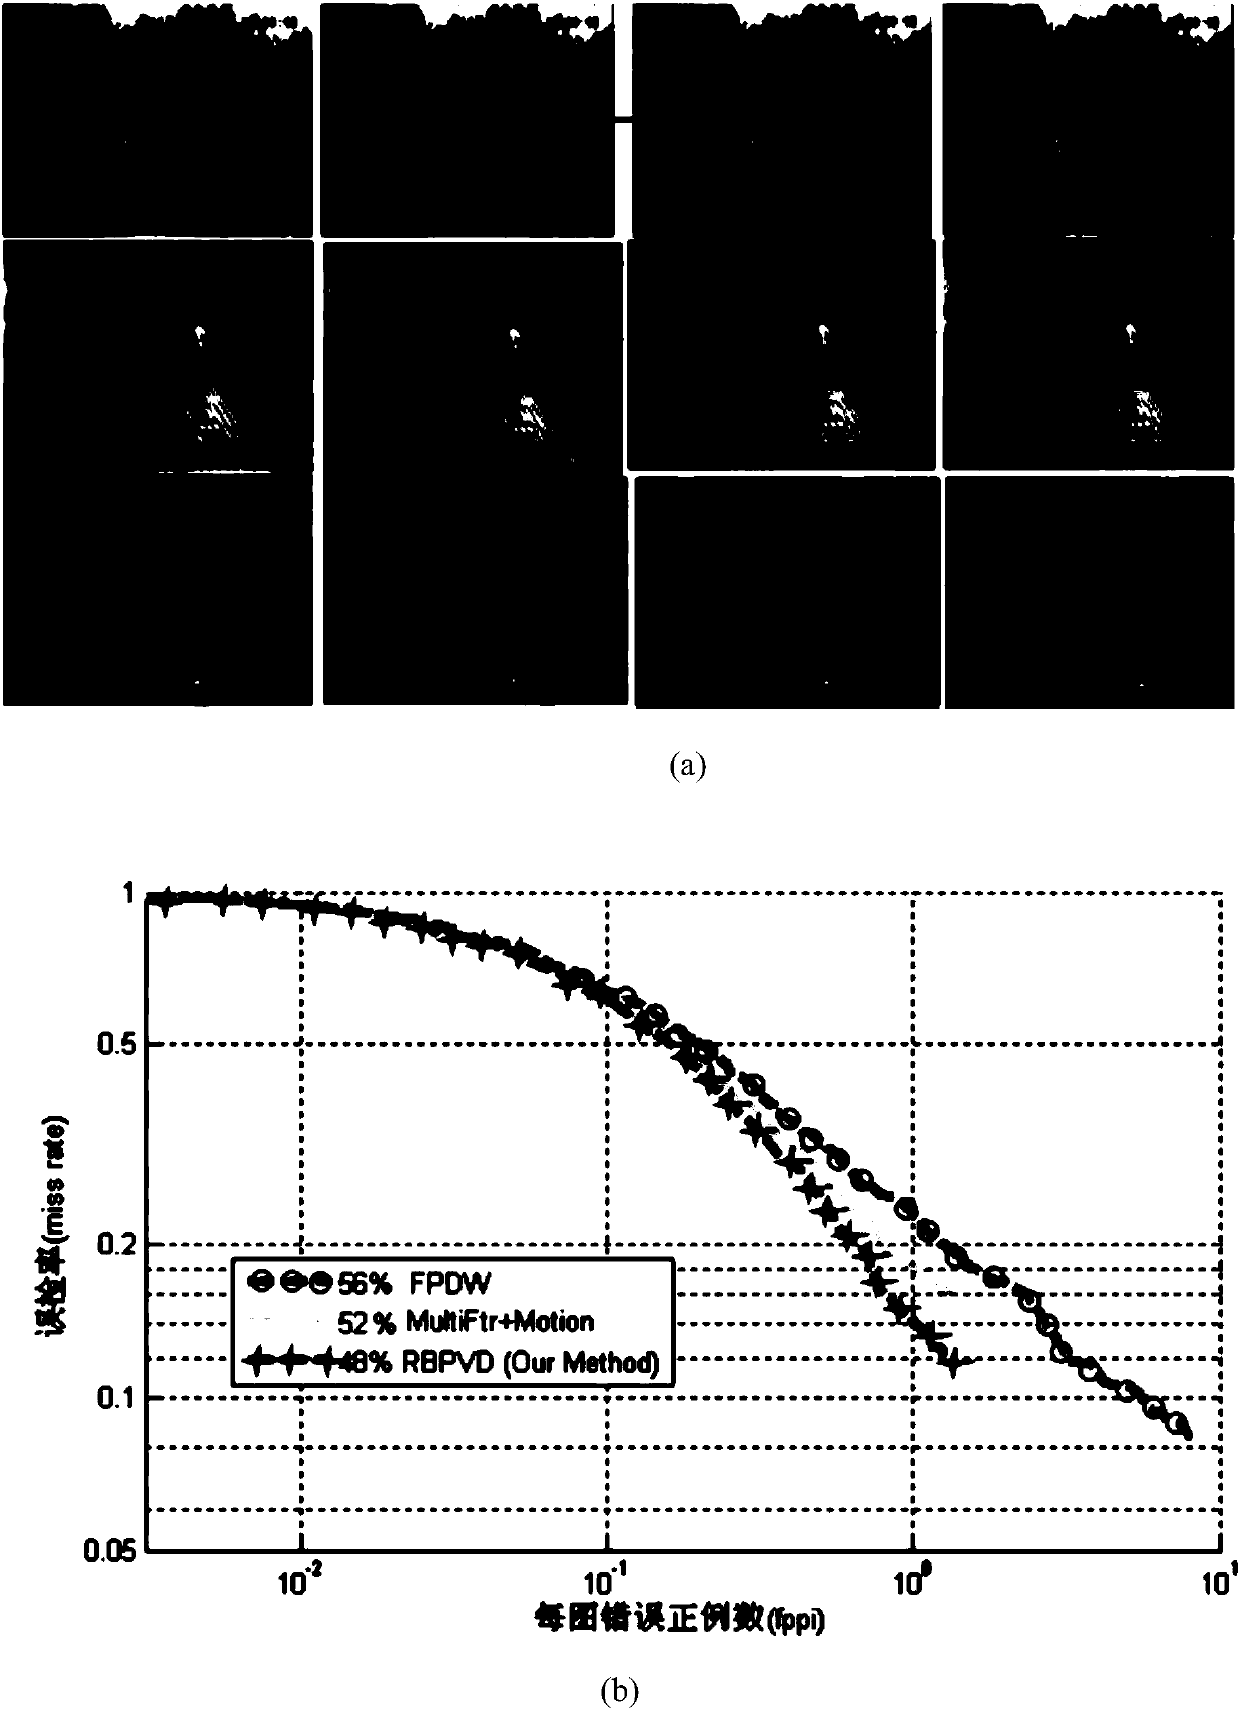 Fast pedestrian detection method with combination of static bottom characteristics and motion information